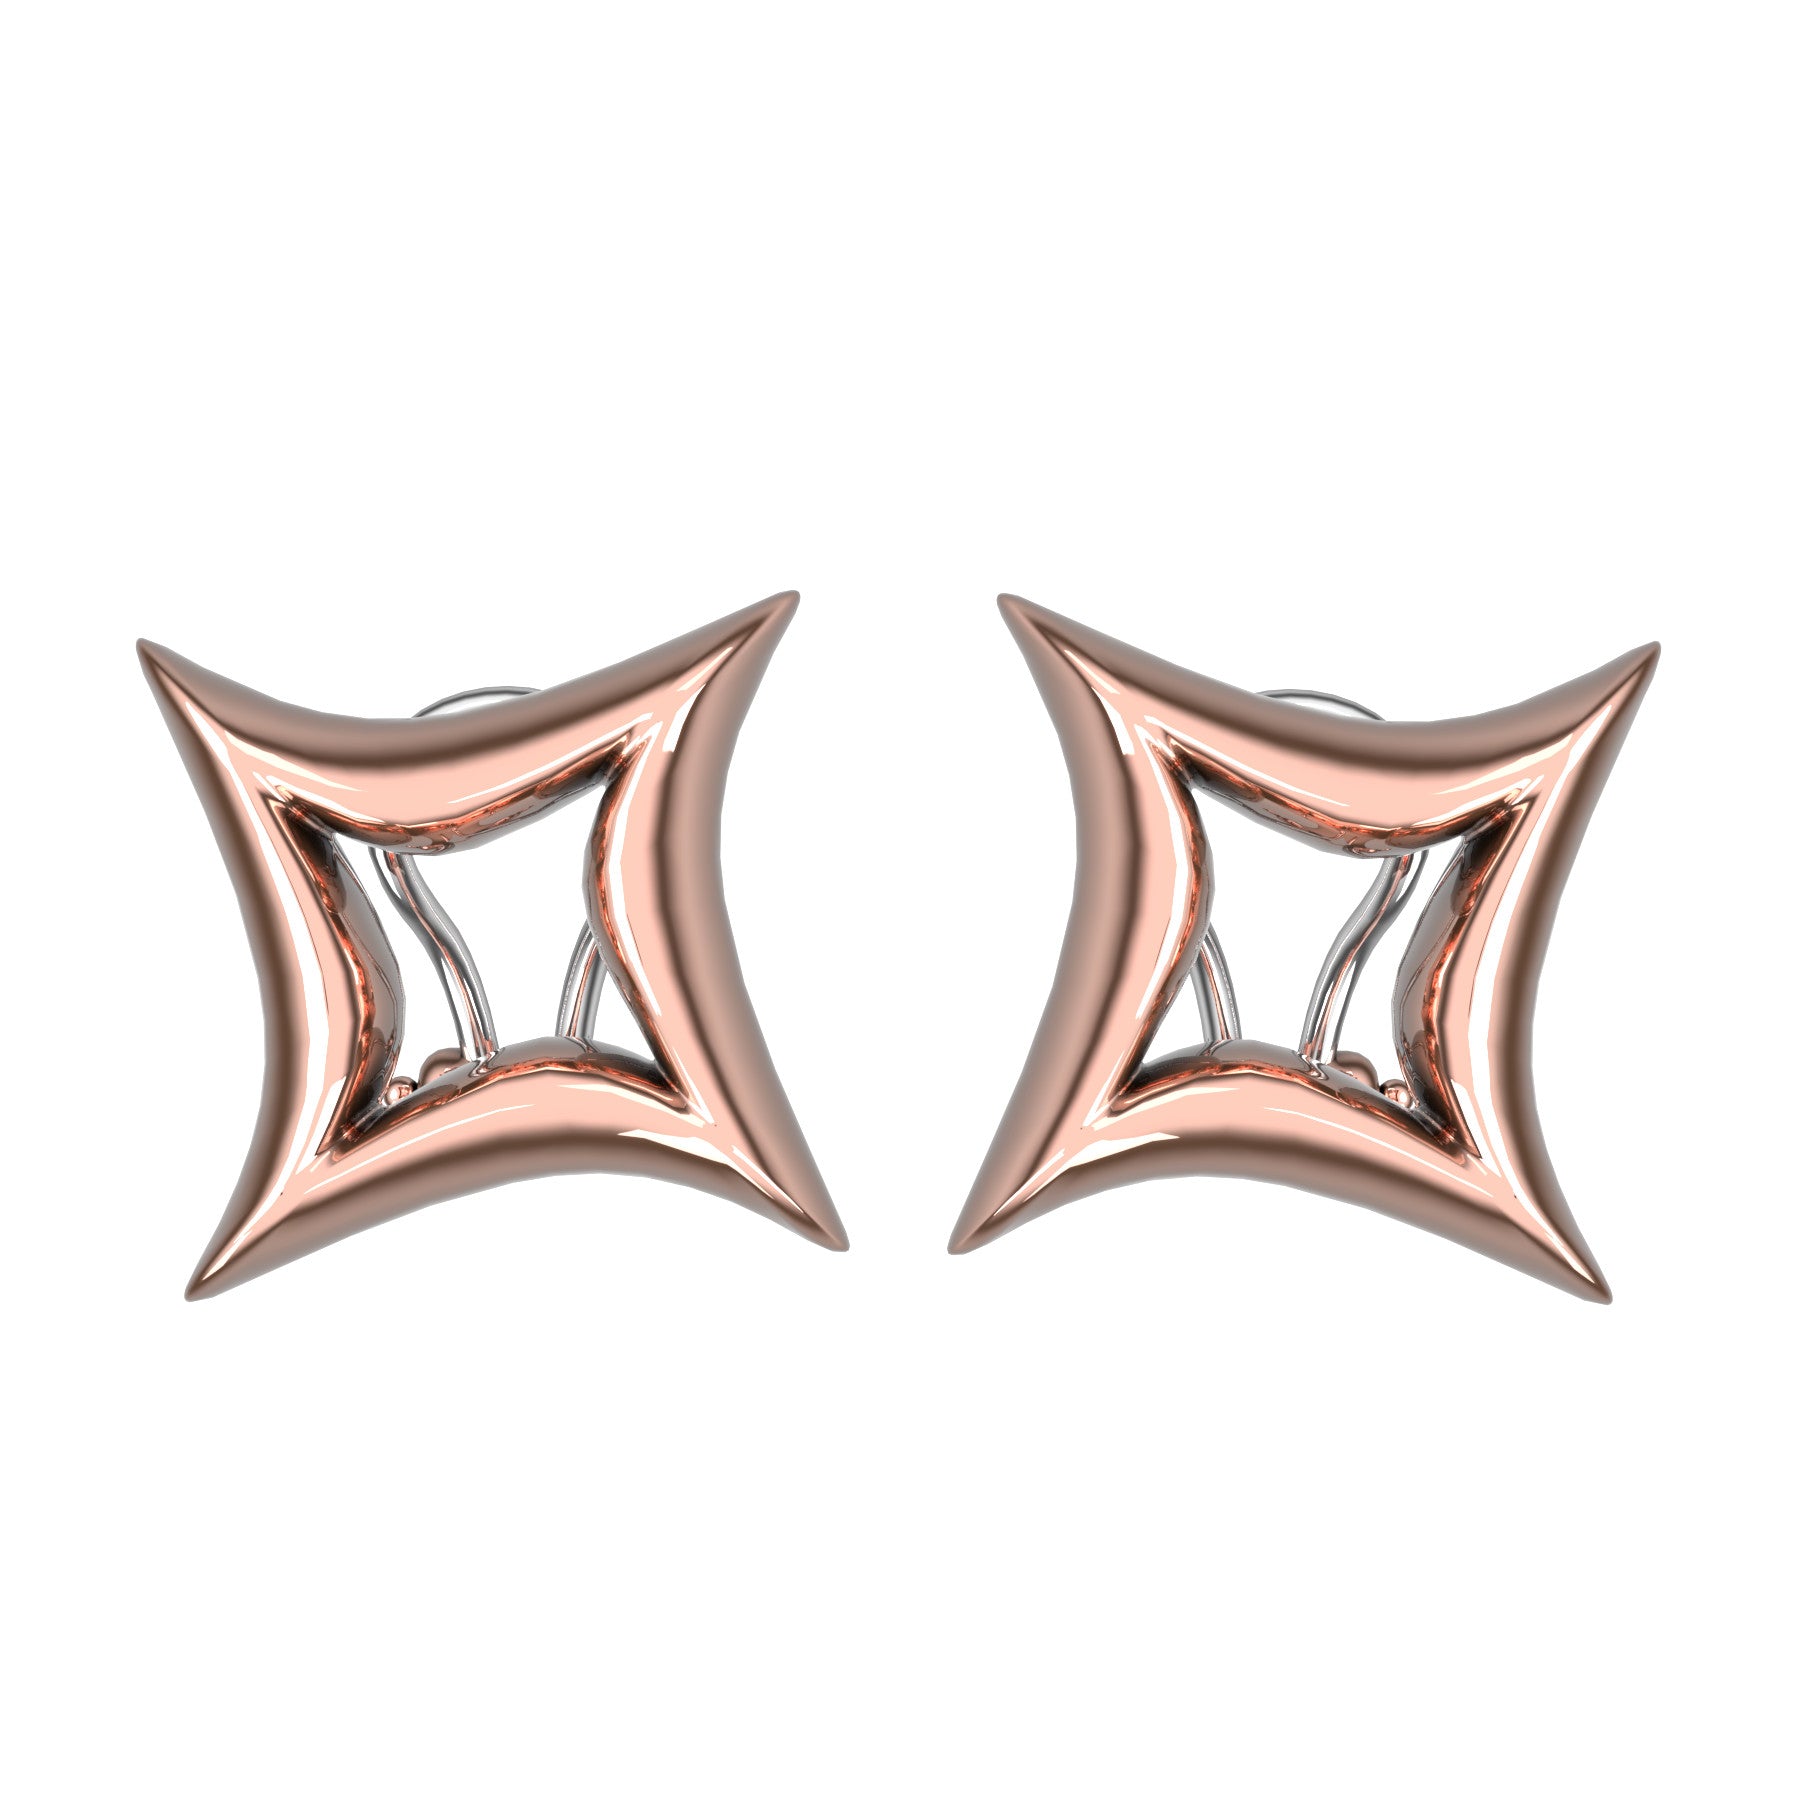 etoiles bizarres earrings, 18 K pink gold, weight about 10,5 g. (0.37 oz) size 16,6x16,6x4,5 mm